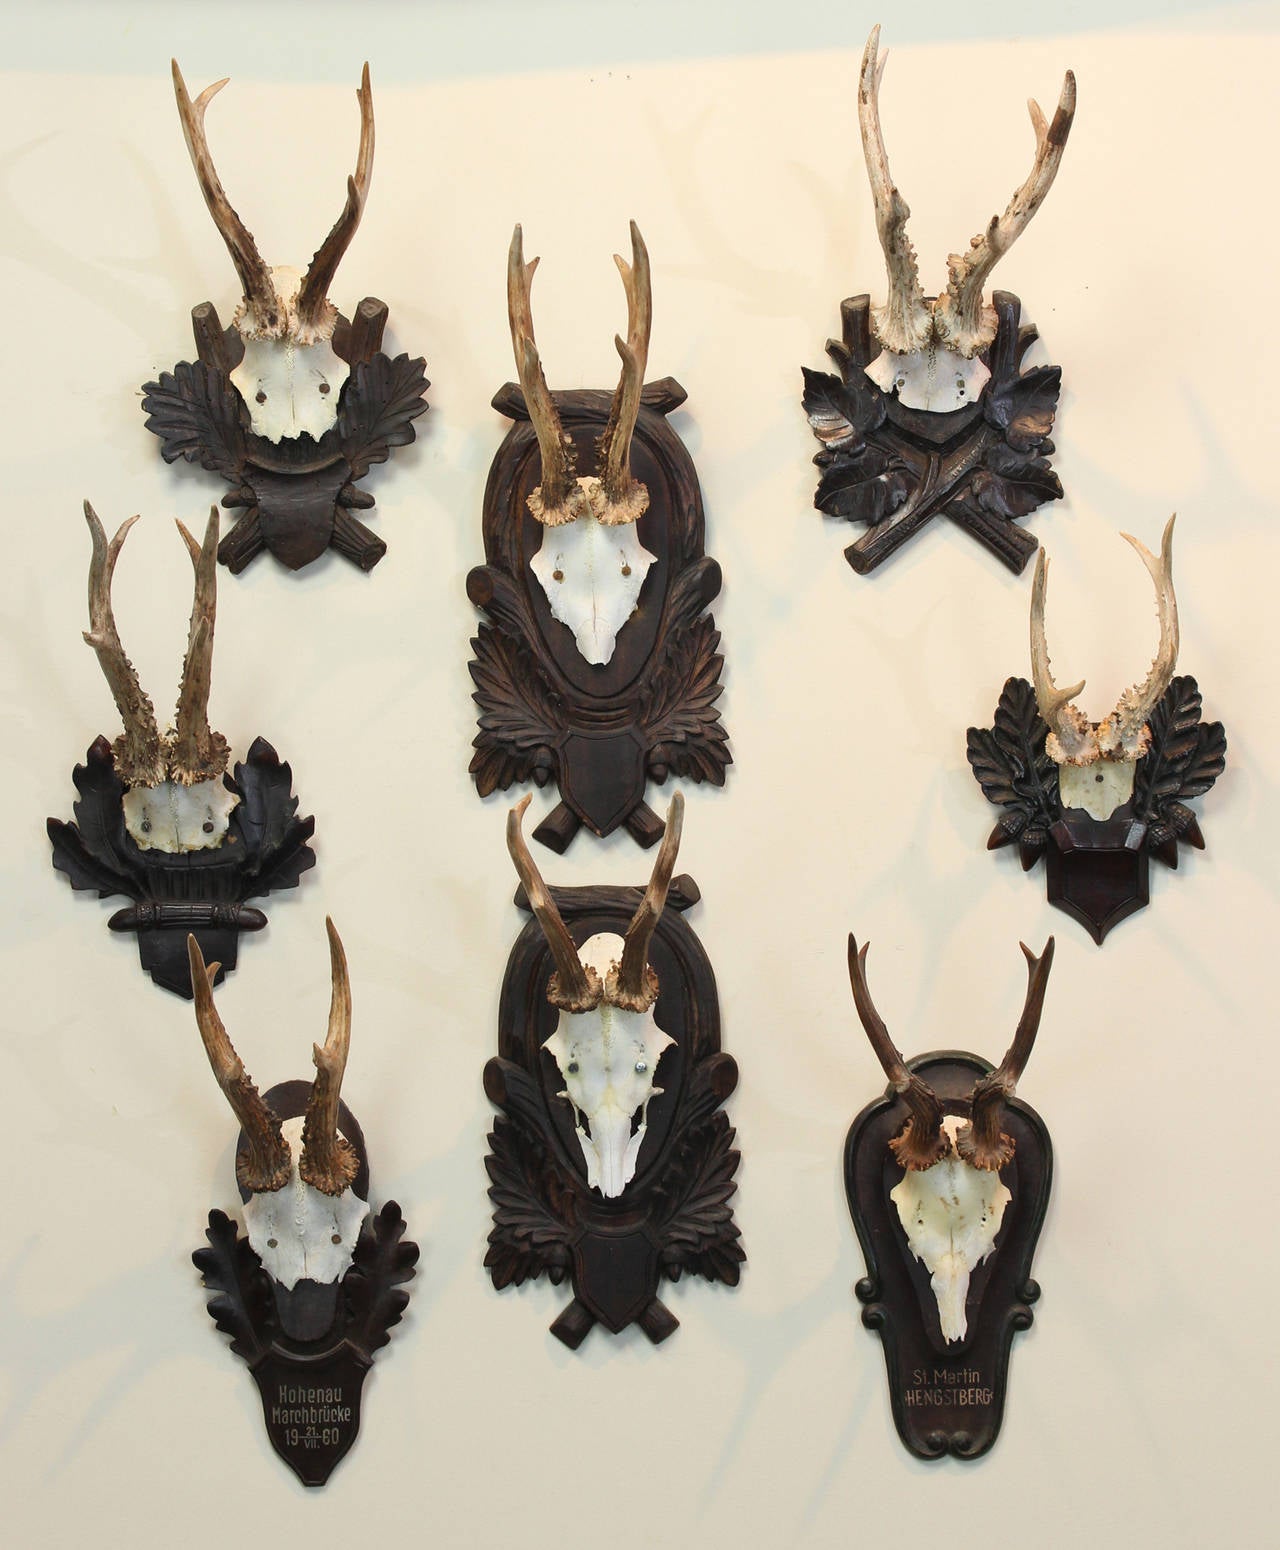 A large and unusual collection of German Roebuck antler trophies with elaborately carved Black Forest mounts. Many of the pieces have names and dates spanning 60 years.